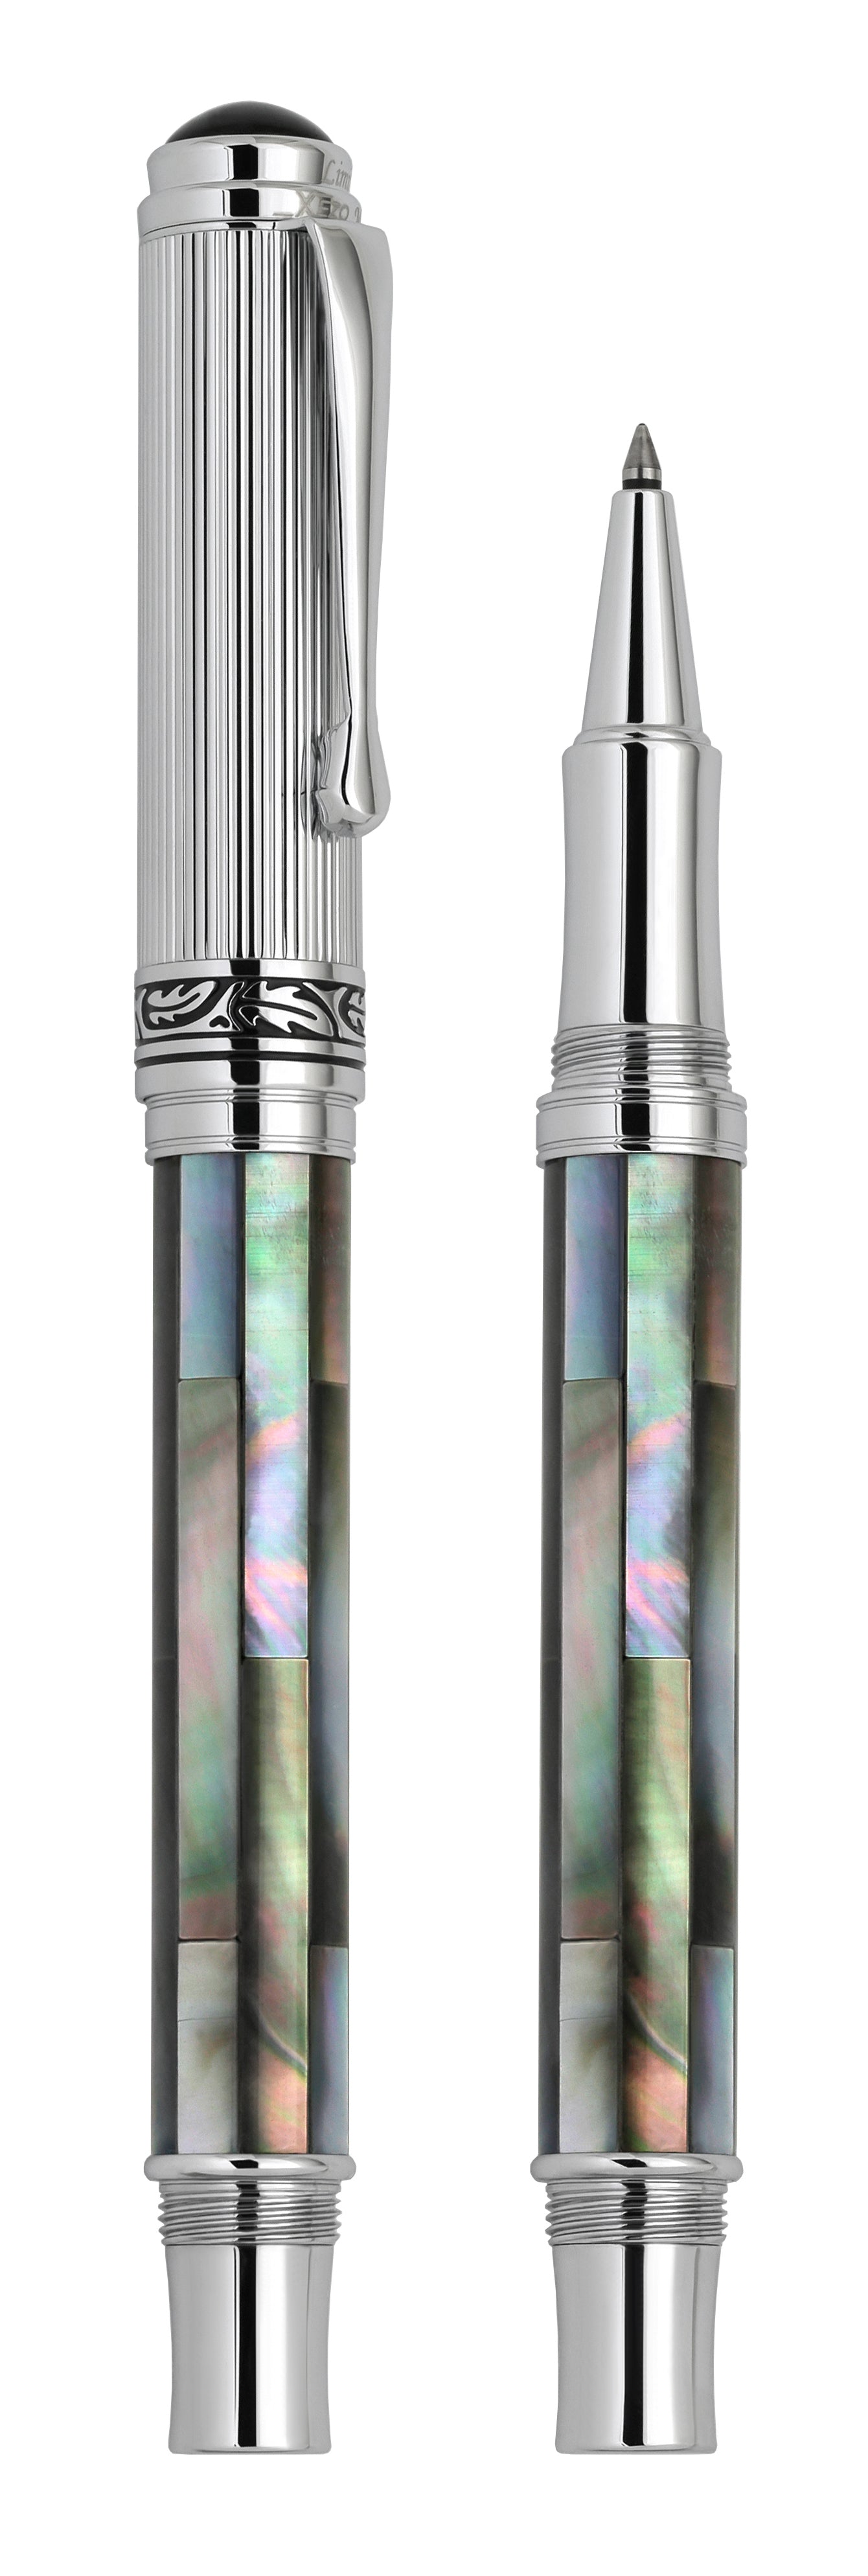 Xezo - Vertical view of two Maestro Black MOP Chrome R rollerball pens. The pen on the left is capped, and the pen on the right has no cap